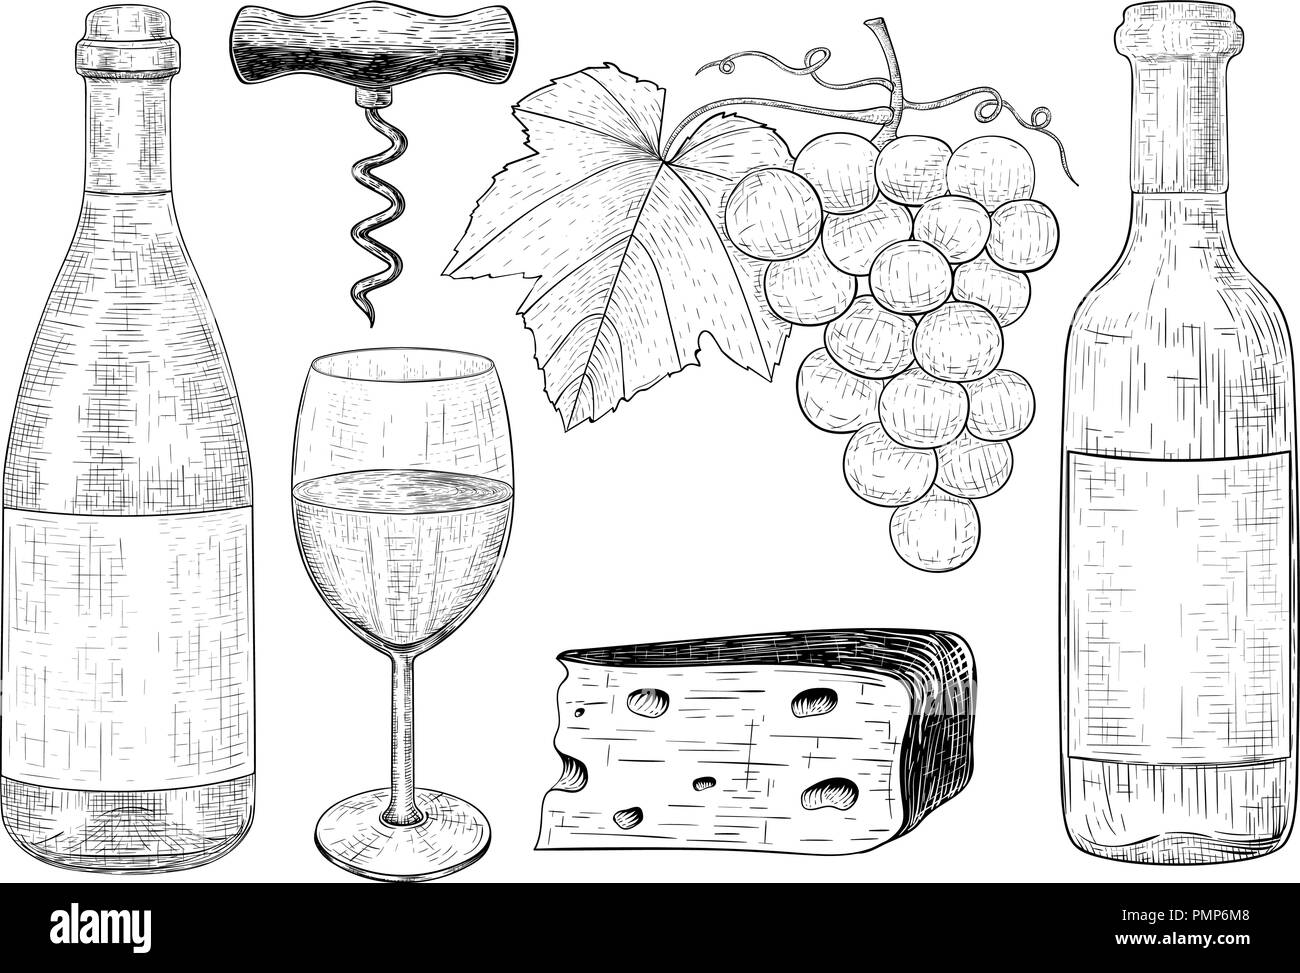 Wine set. Botlle of wine, glass, grapes, cheese, corkscrew. Hand drawn sketch. Vintage style Stock Vector